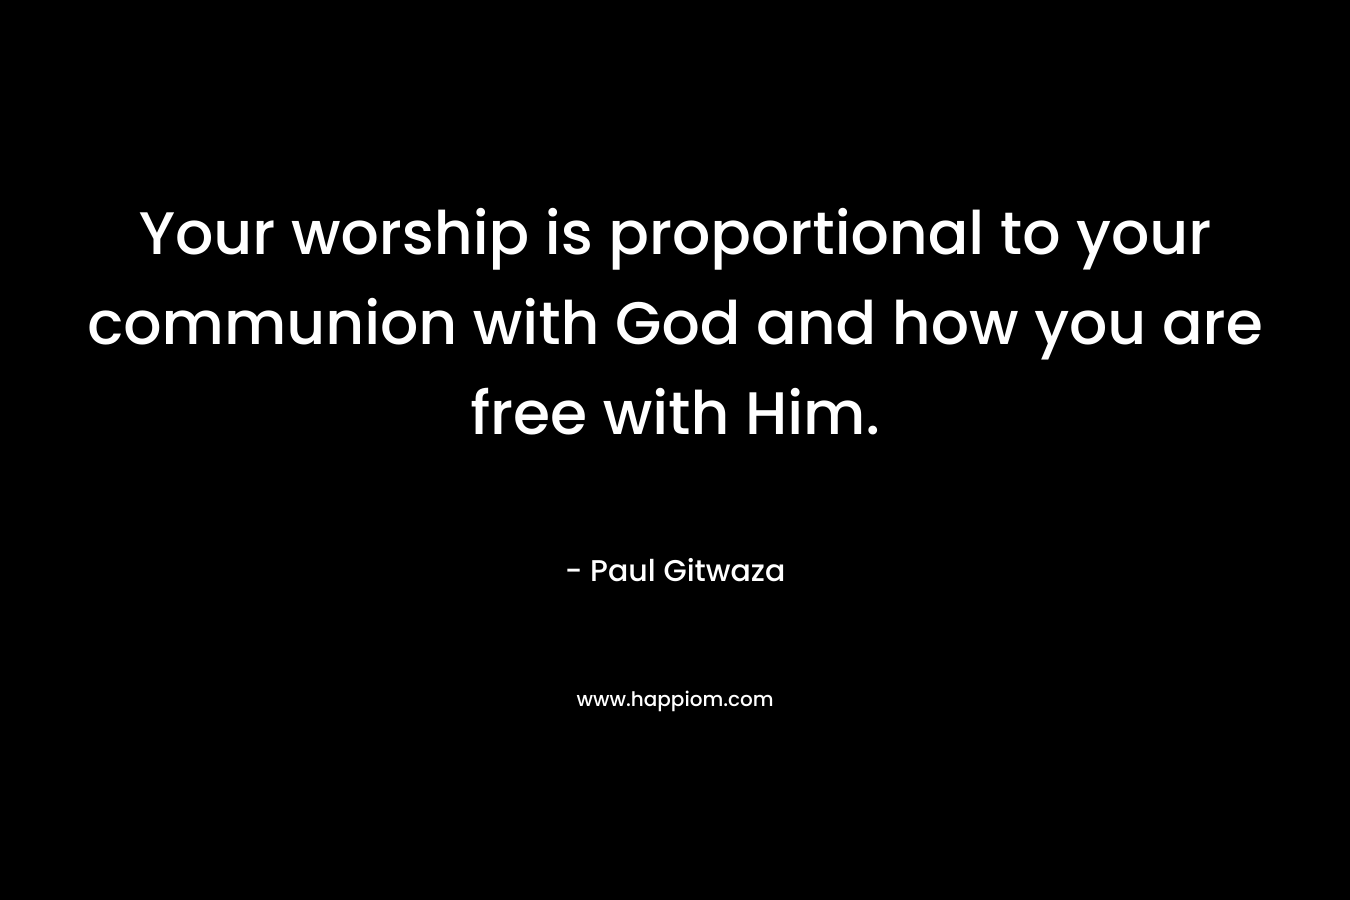 Your worship is proportional to your communion with God and how you are free with Him.